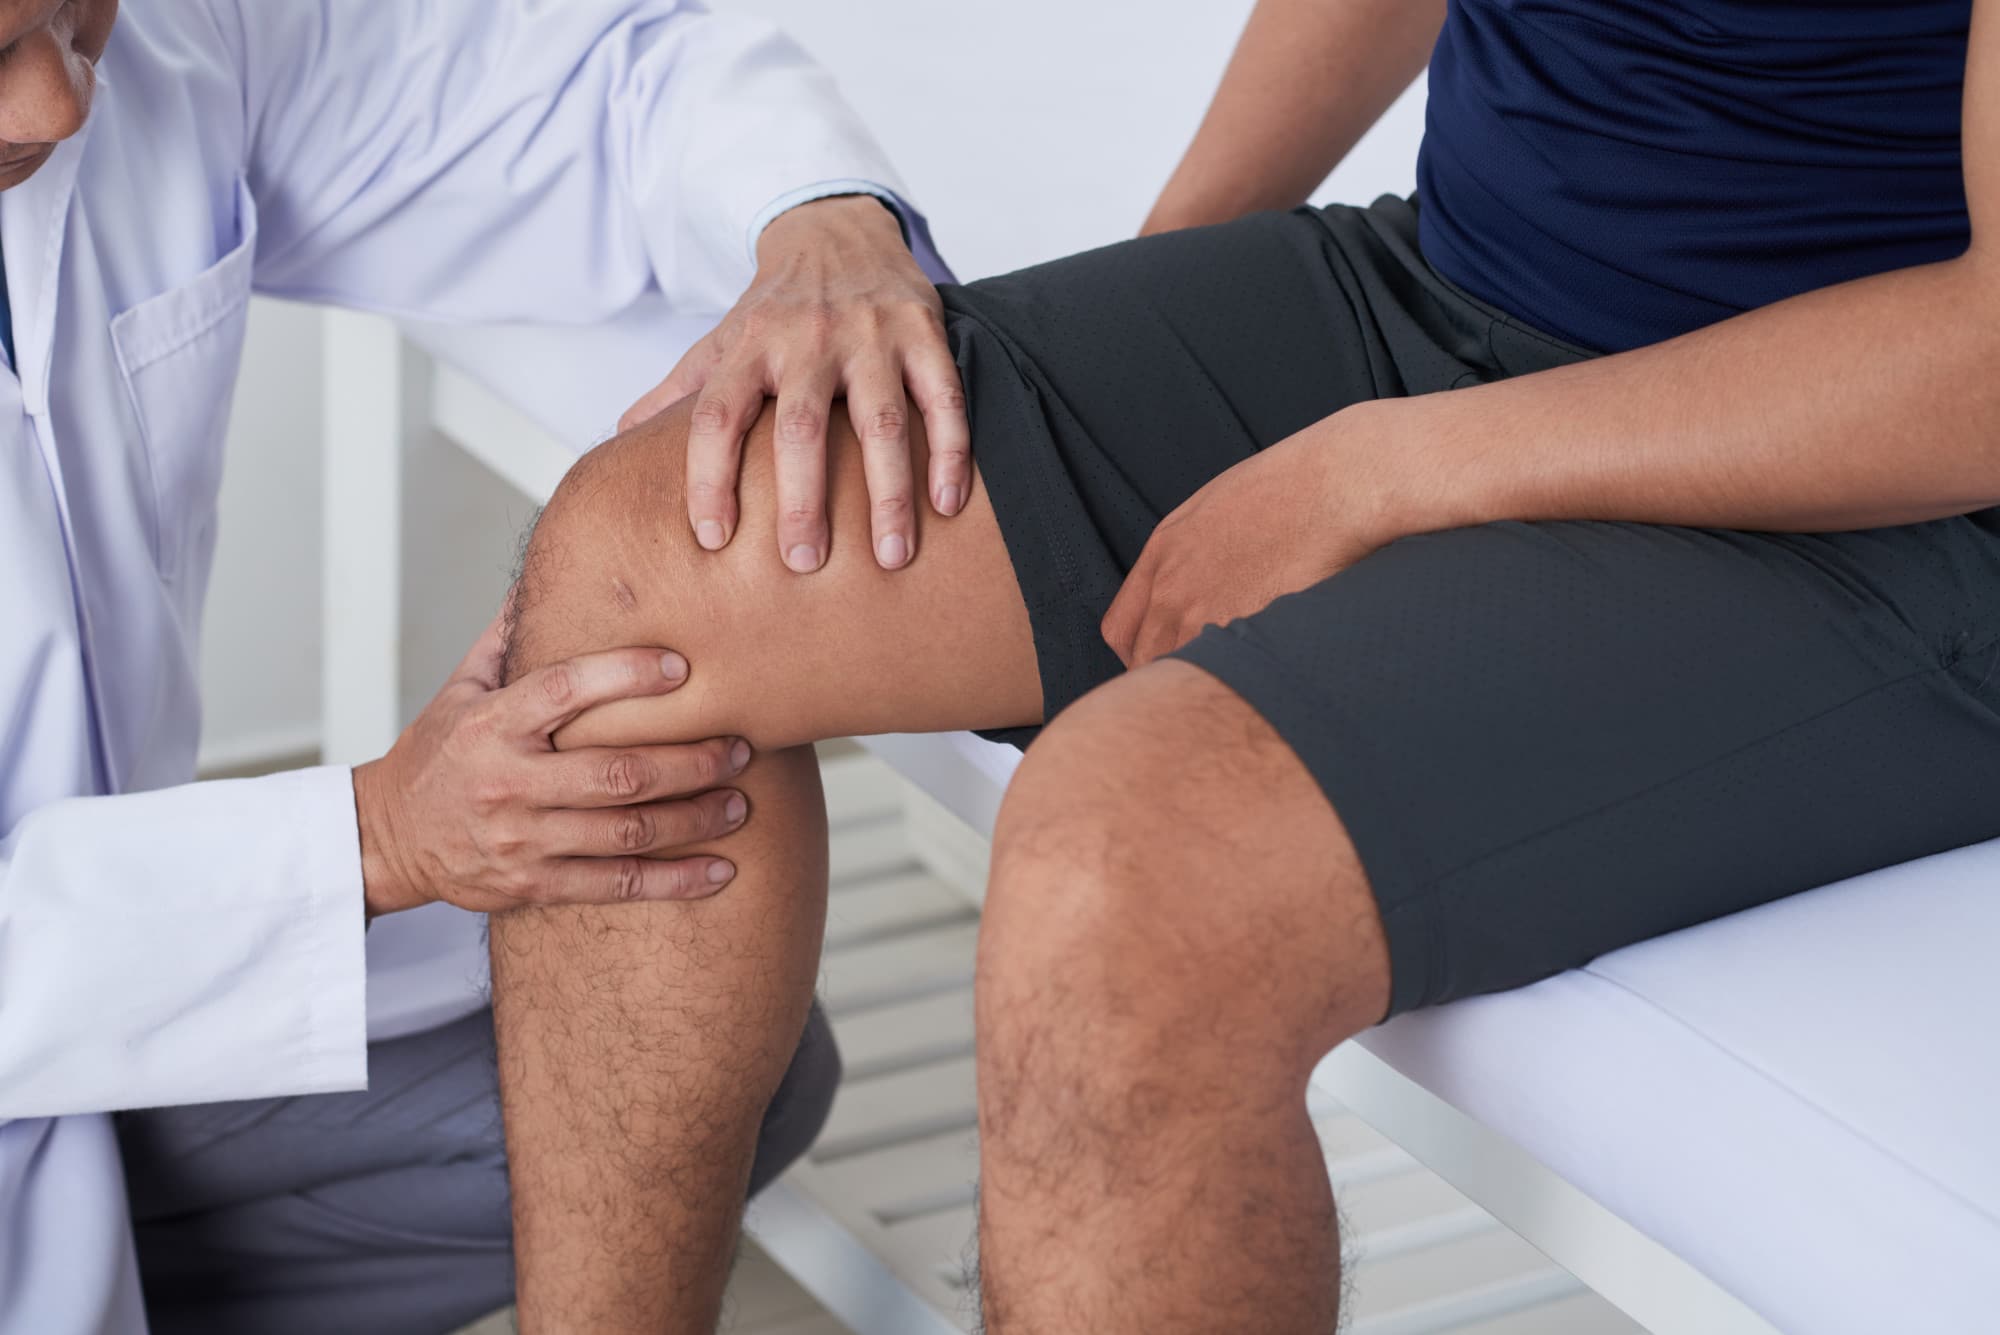 Knee Injuries from Car Accidents